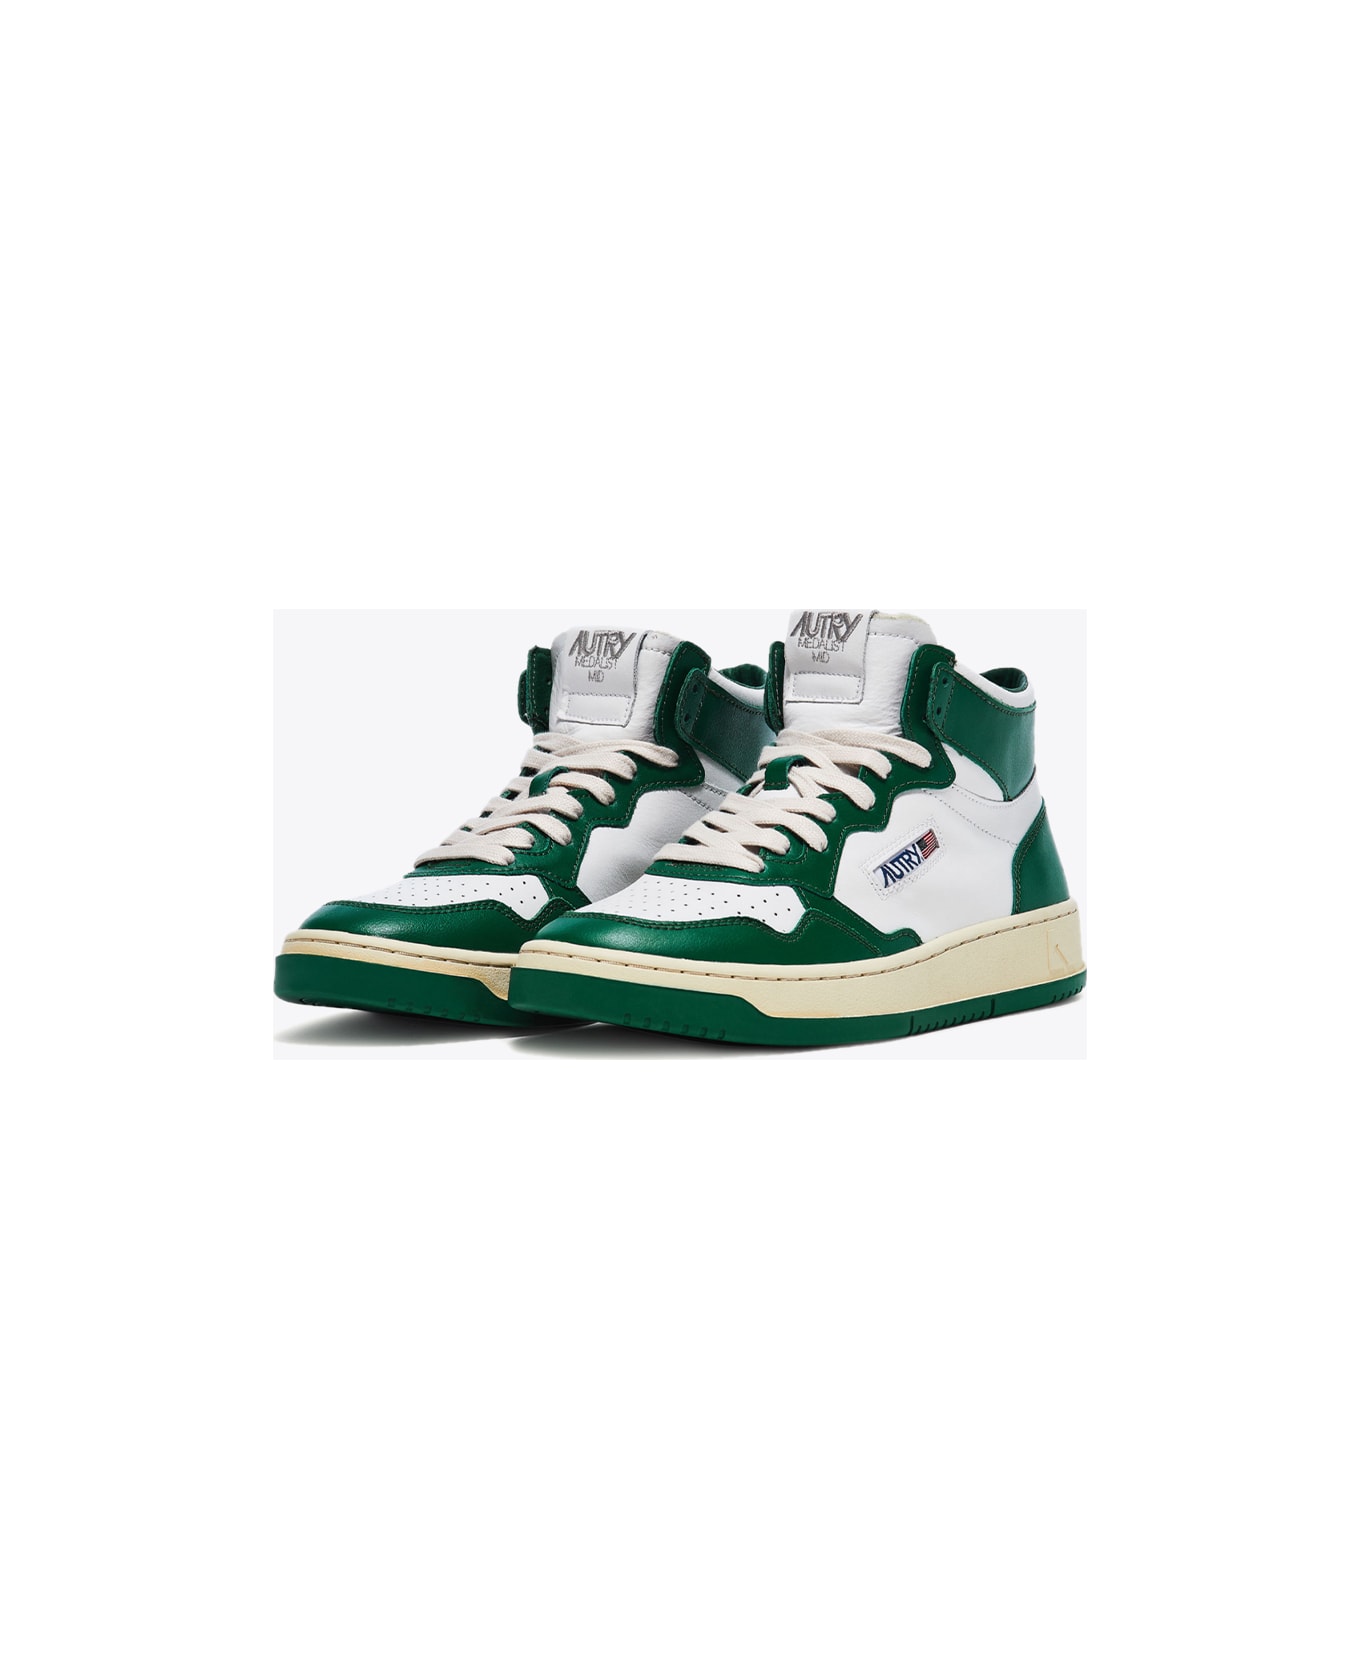 Autry 01 Mid Man Leat Mountain White and green leather mid top sneaker - Medalist Mid - Bianco/verde